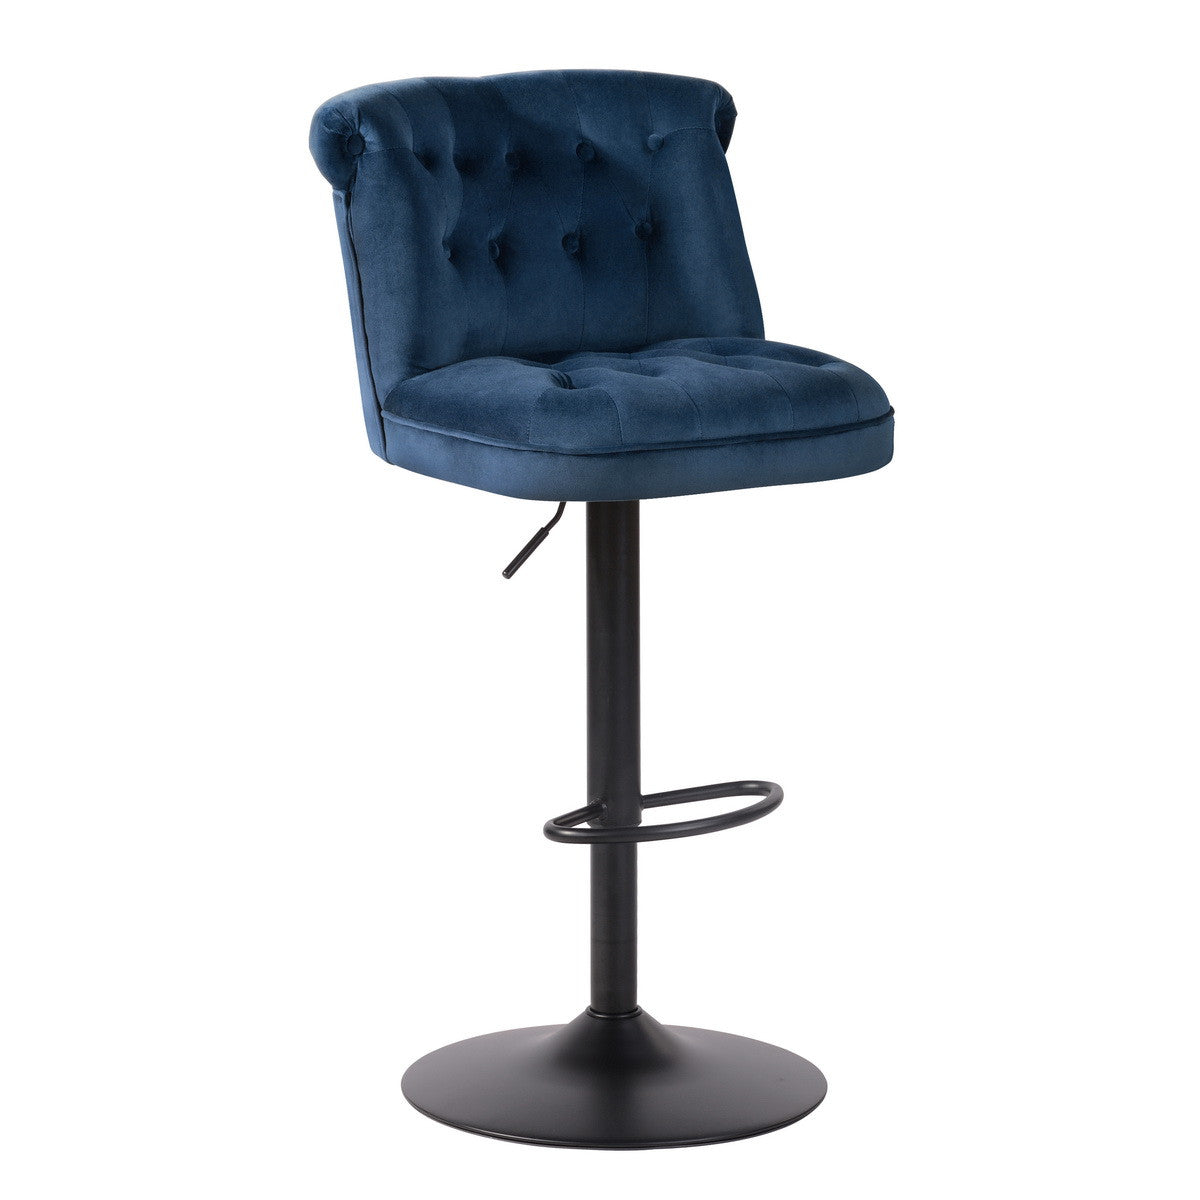 45" Blue And Black Swivel Low Back Adjustable Height Bar Chair With Footrest